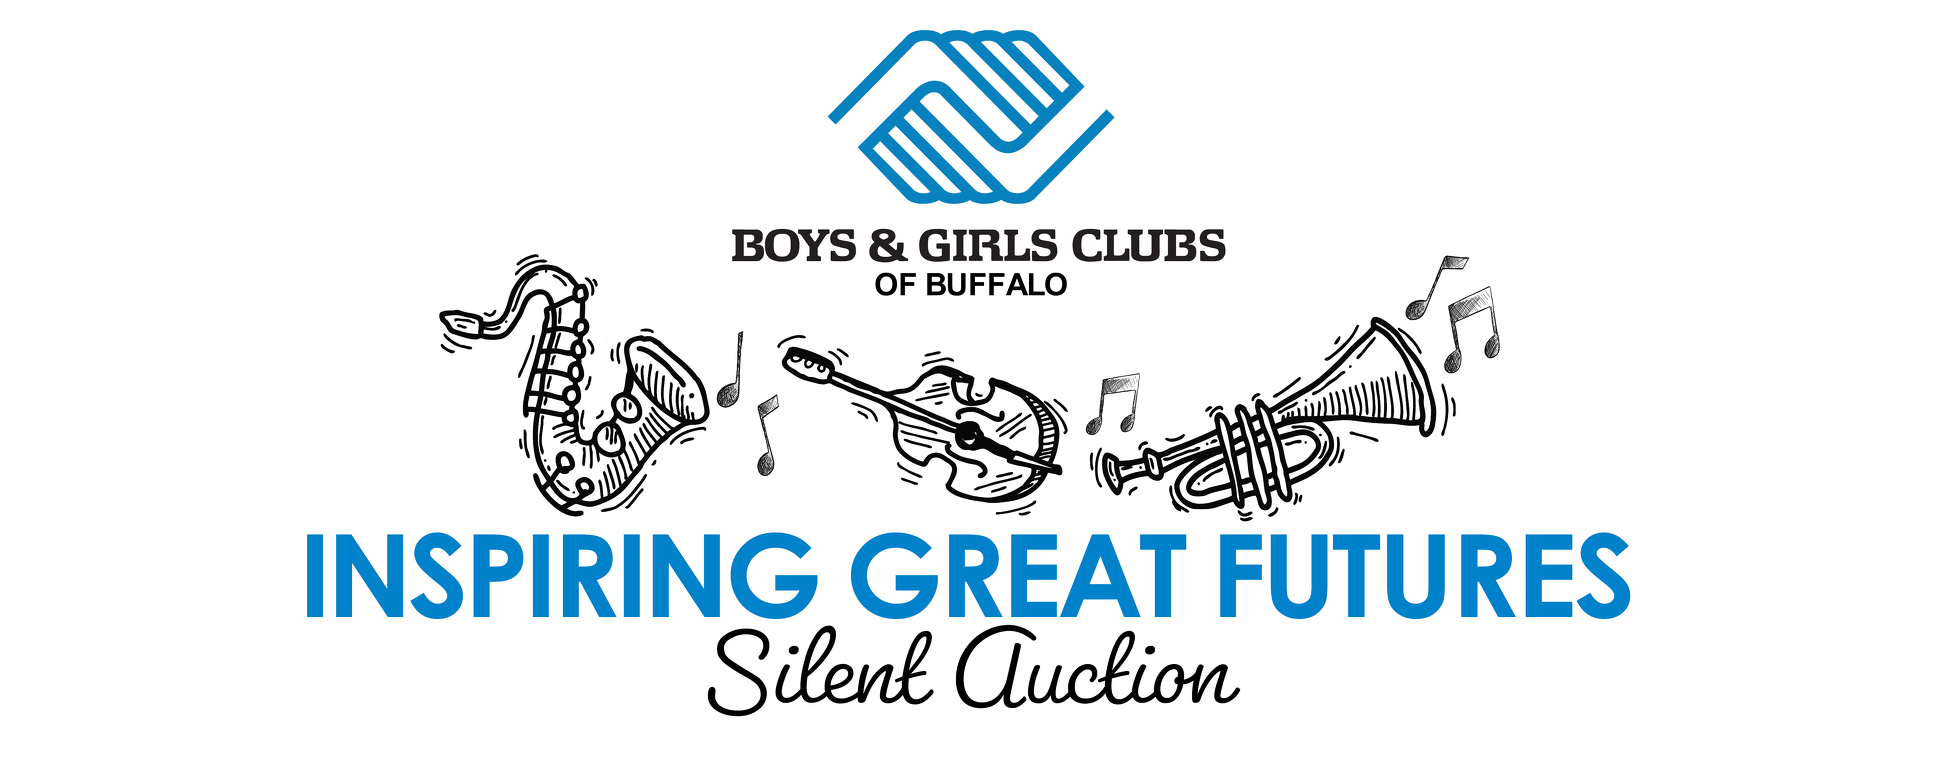 Inspiring Great Futures Silent Auction